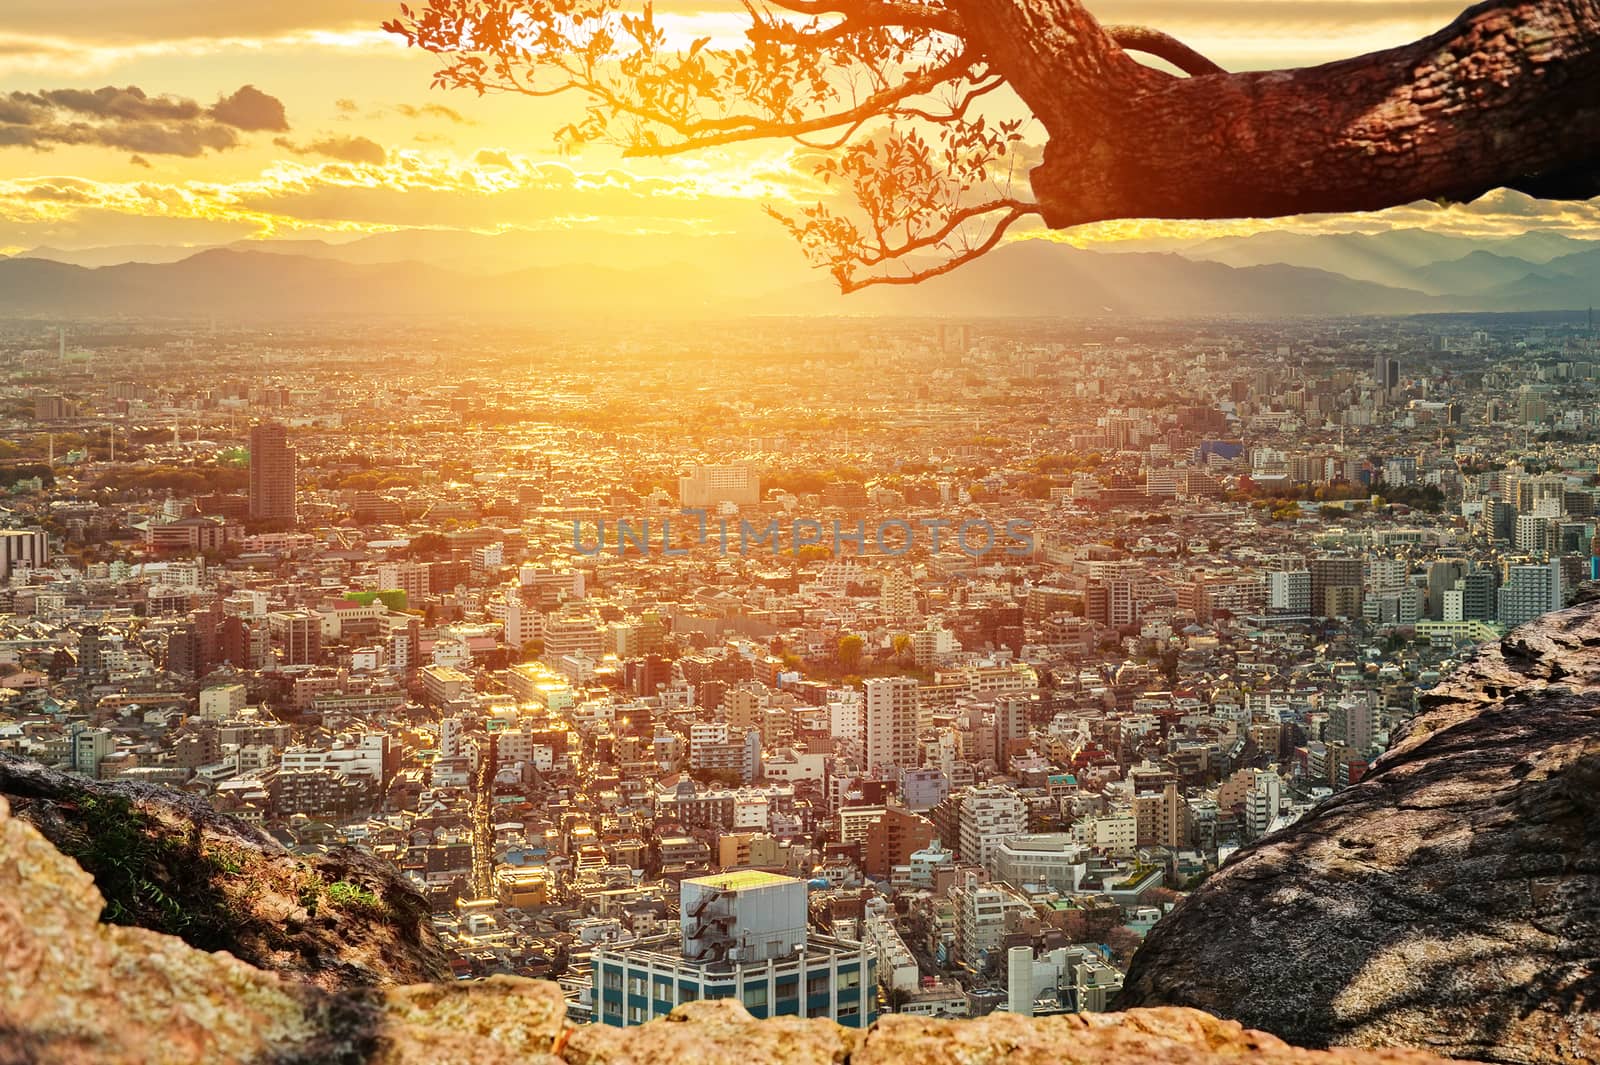 View City in Japan On High Mountain by Surasak